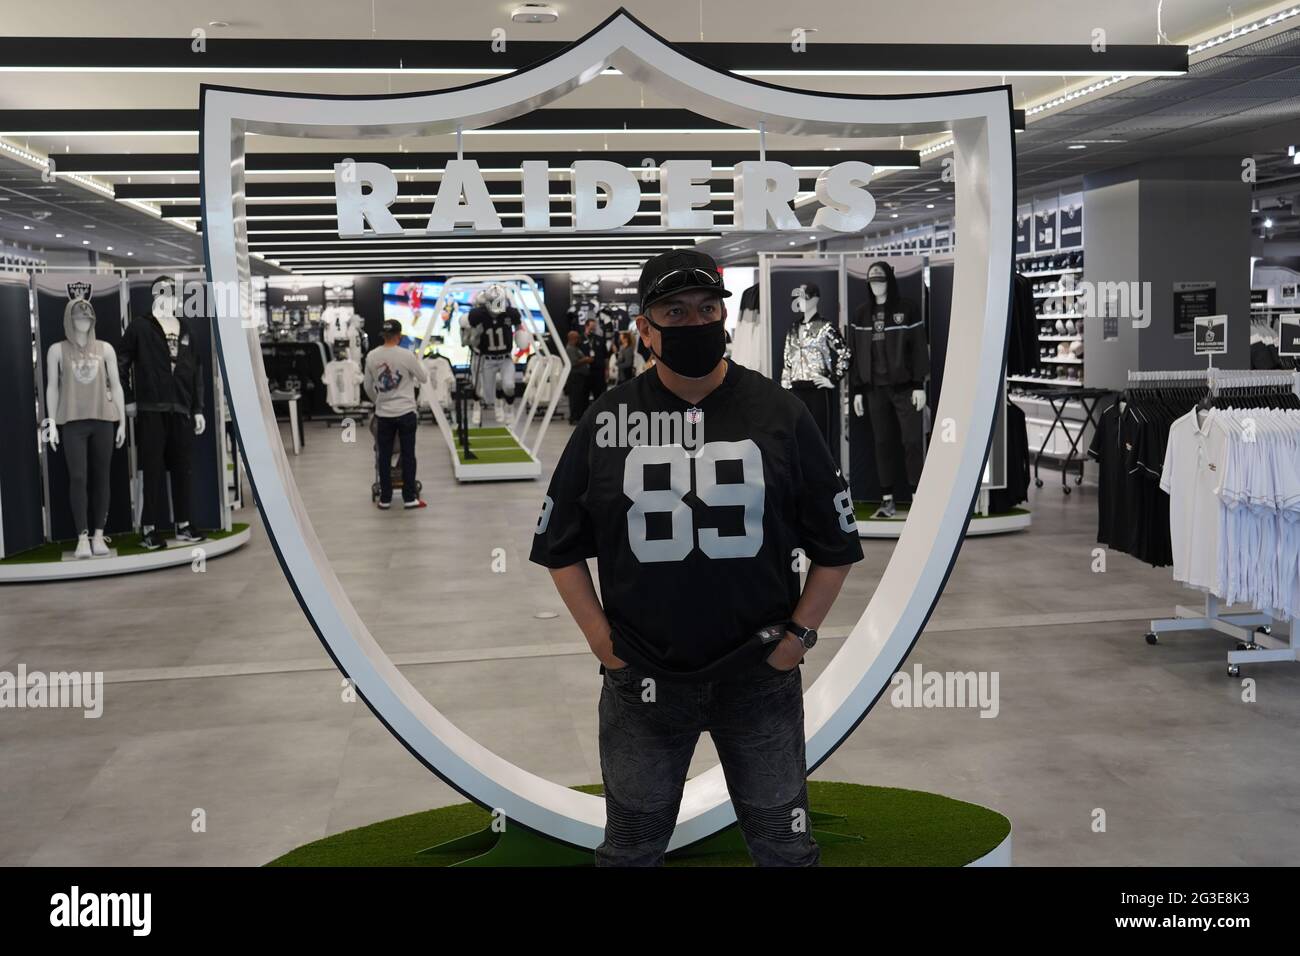 Las Vegas, United States. 07th Mar, 2021. A man poses inside the Raider  Image team store at Allegiant Stadium, Sunday March 7, 2021, in Las Vegas.  The stadium is the home of